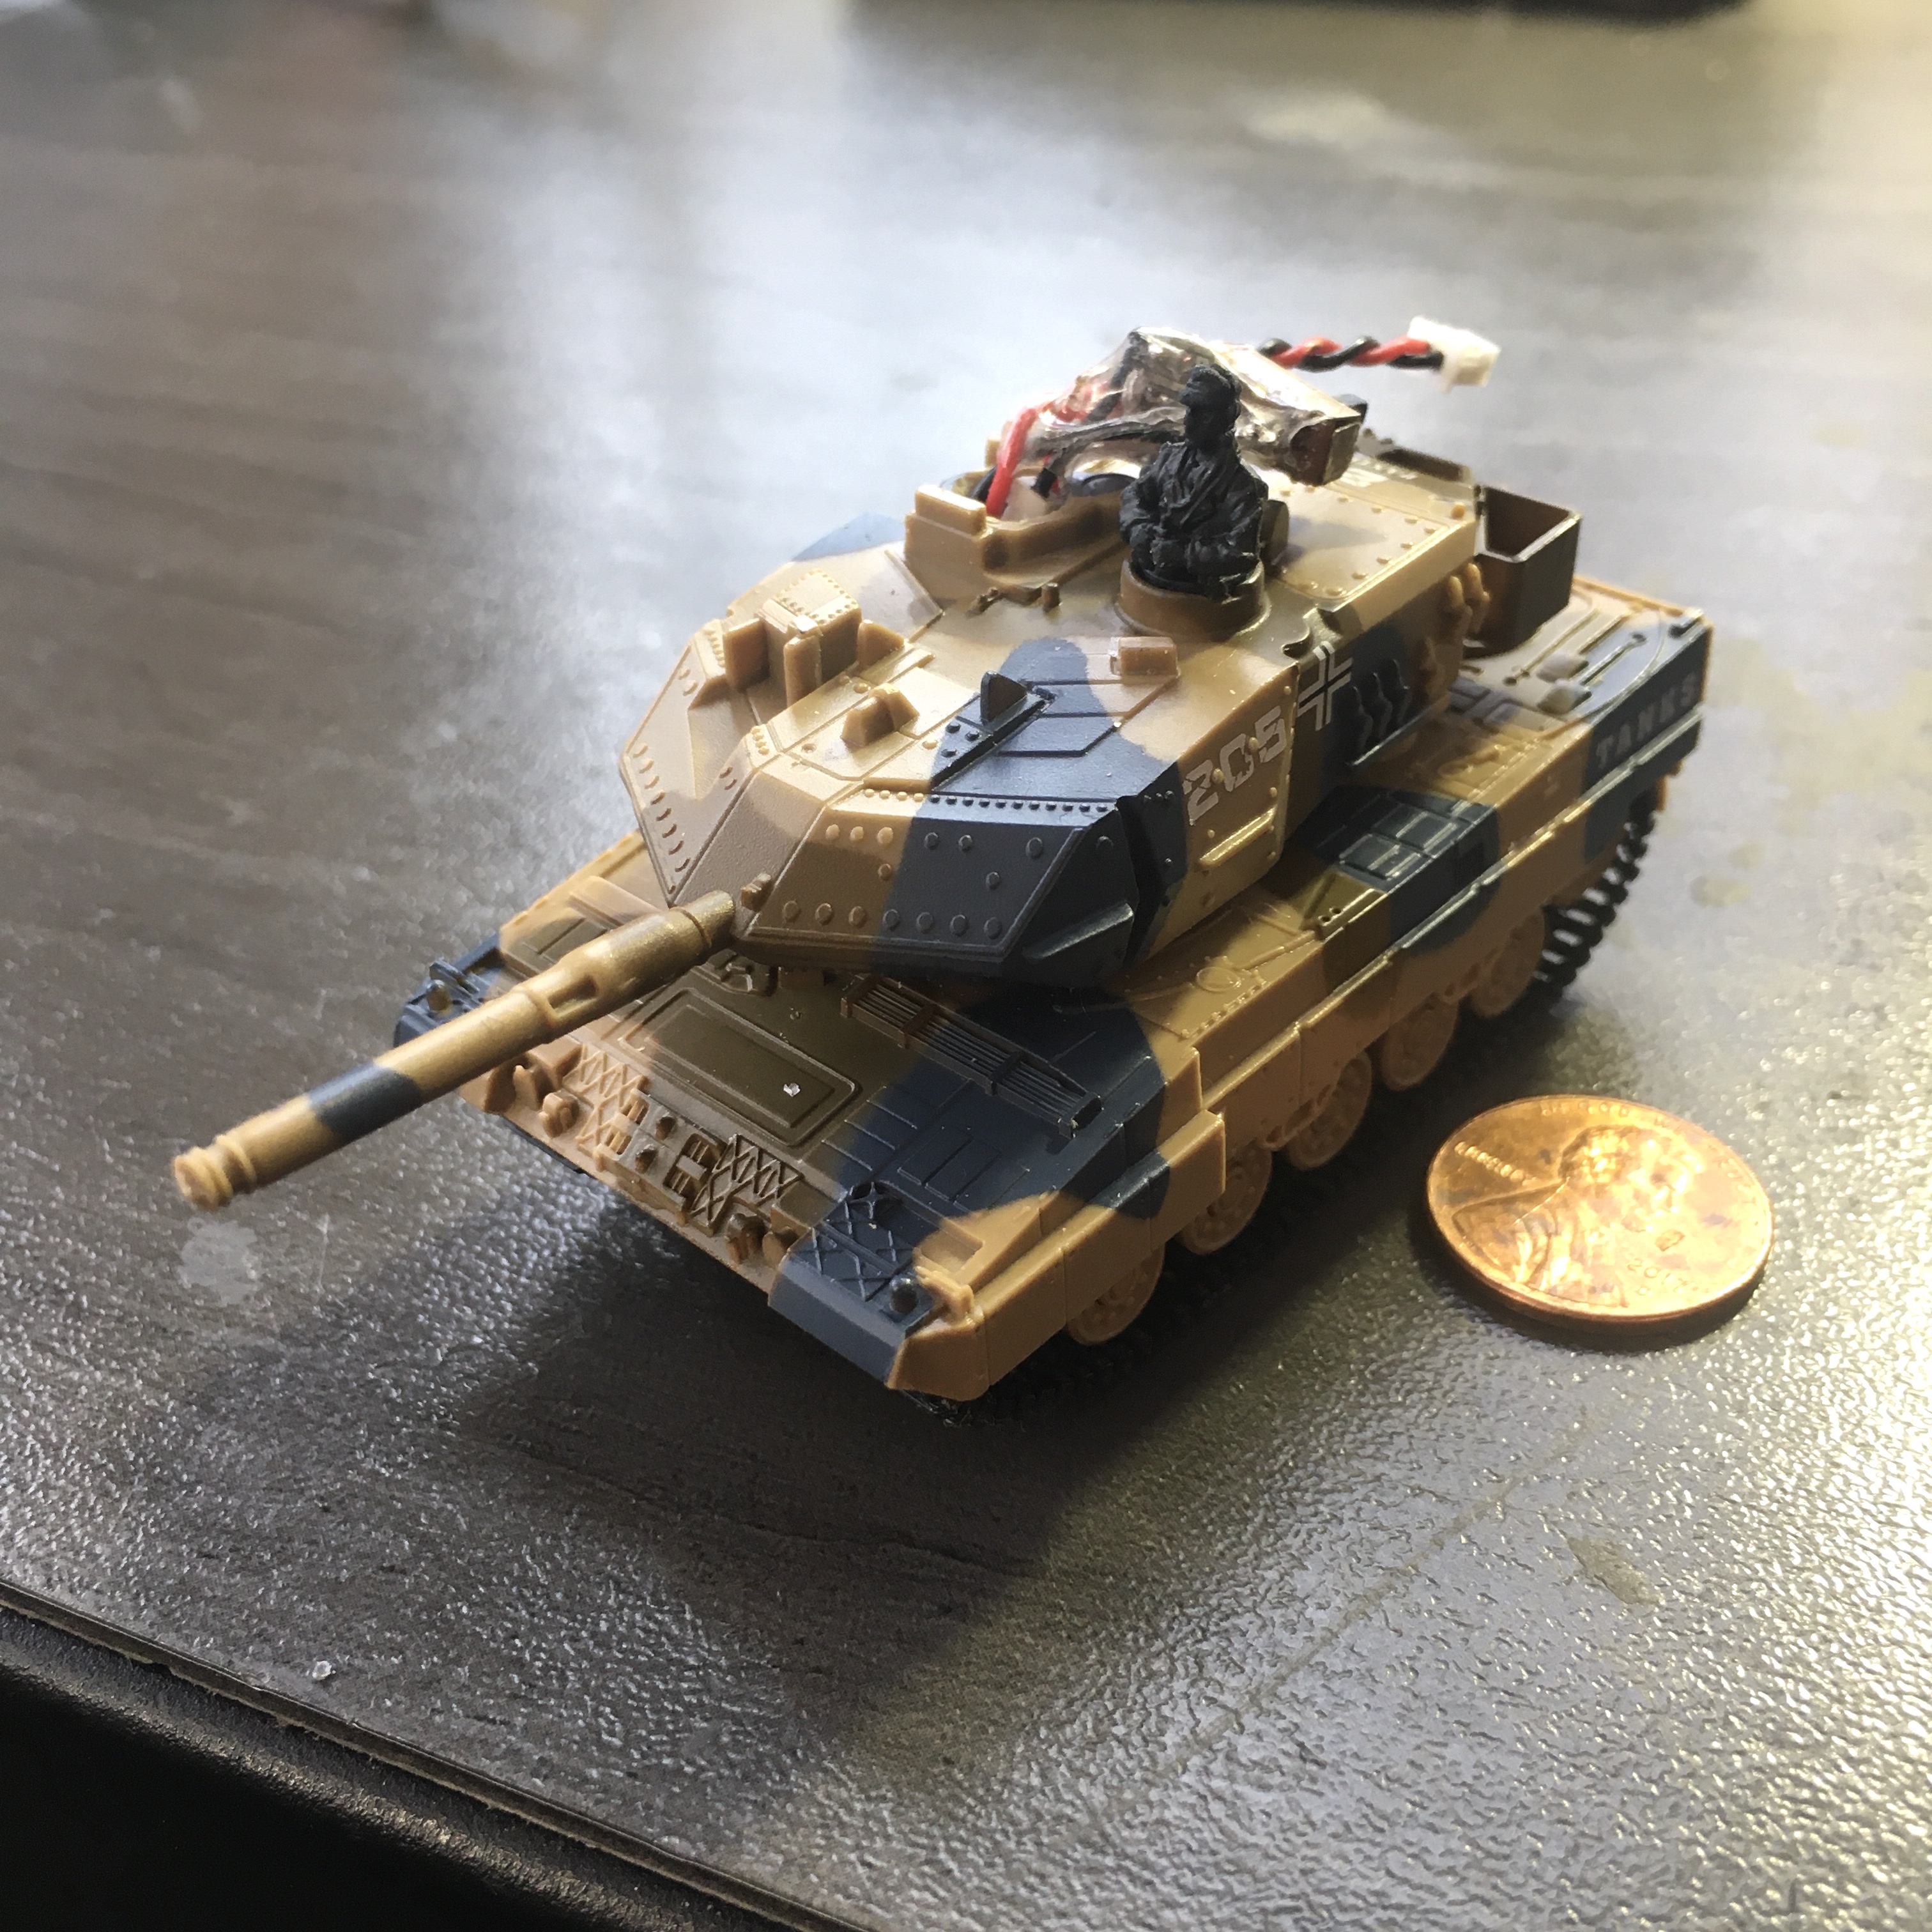 Here it is,  WORLDS SMALLEST (1:77) HOBBY GRADE RADIO CONTROL TANK.  A 100mAh lipo sits in the Turret. external on\off switch with charge plug is visible here.